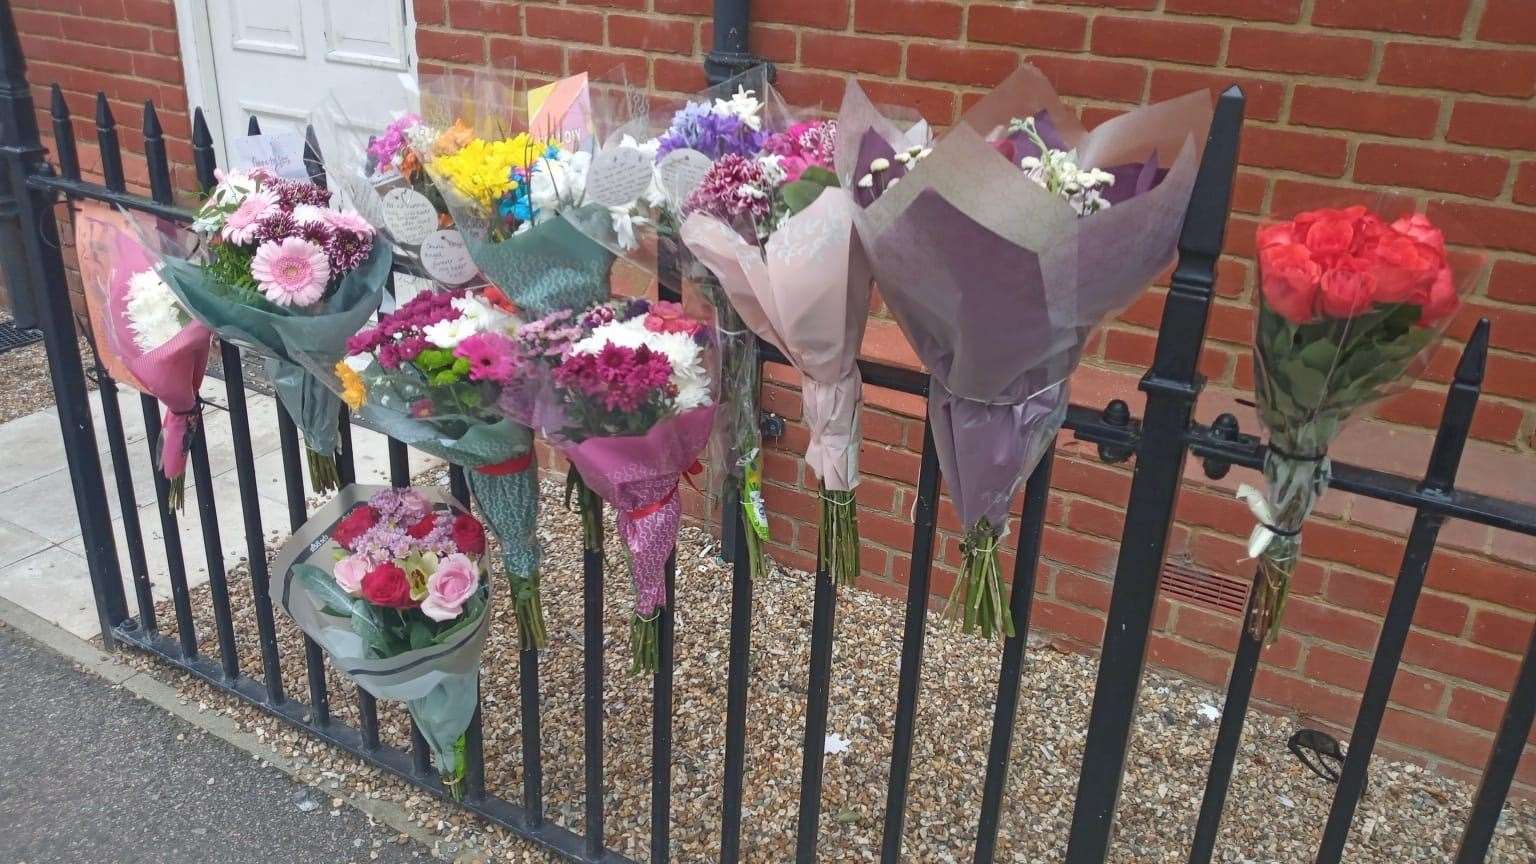 Flowers have been attached to a railing outside a home in Creine Mill Lane North, Canterbury, with heartfelt tributes to the woman